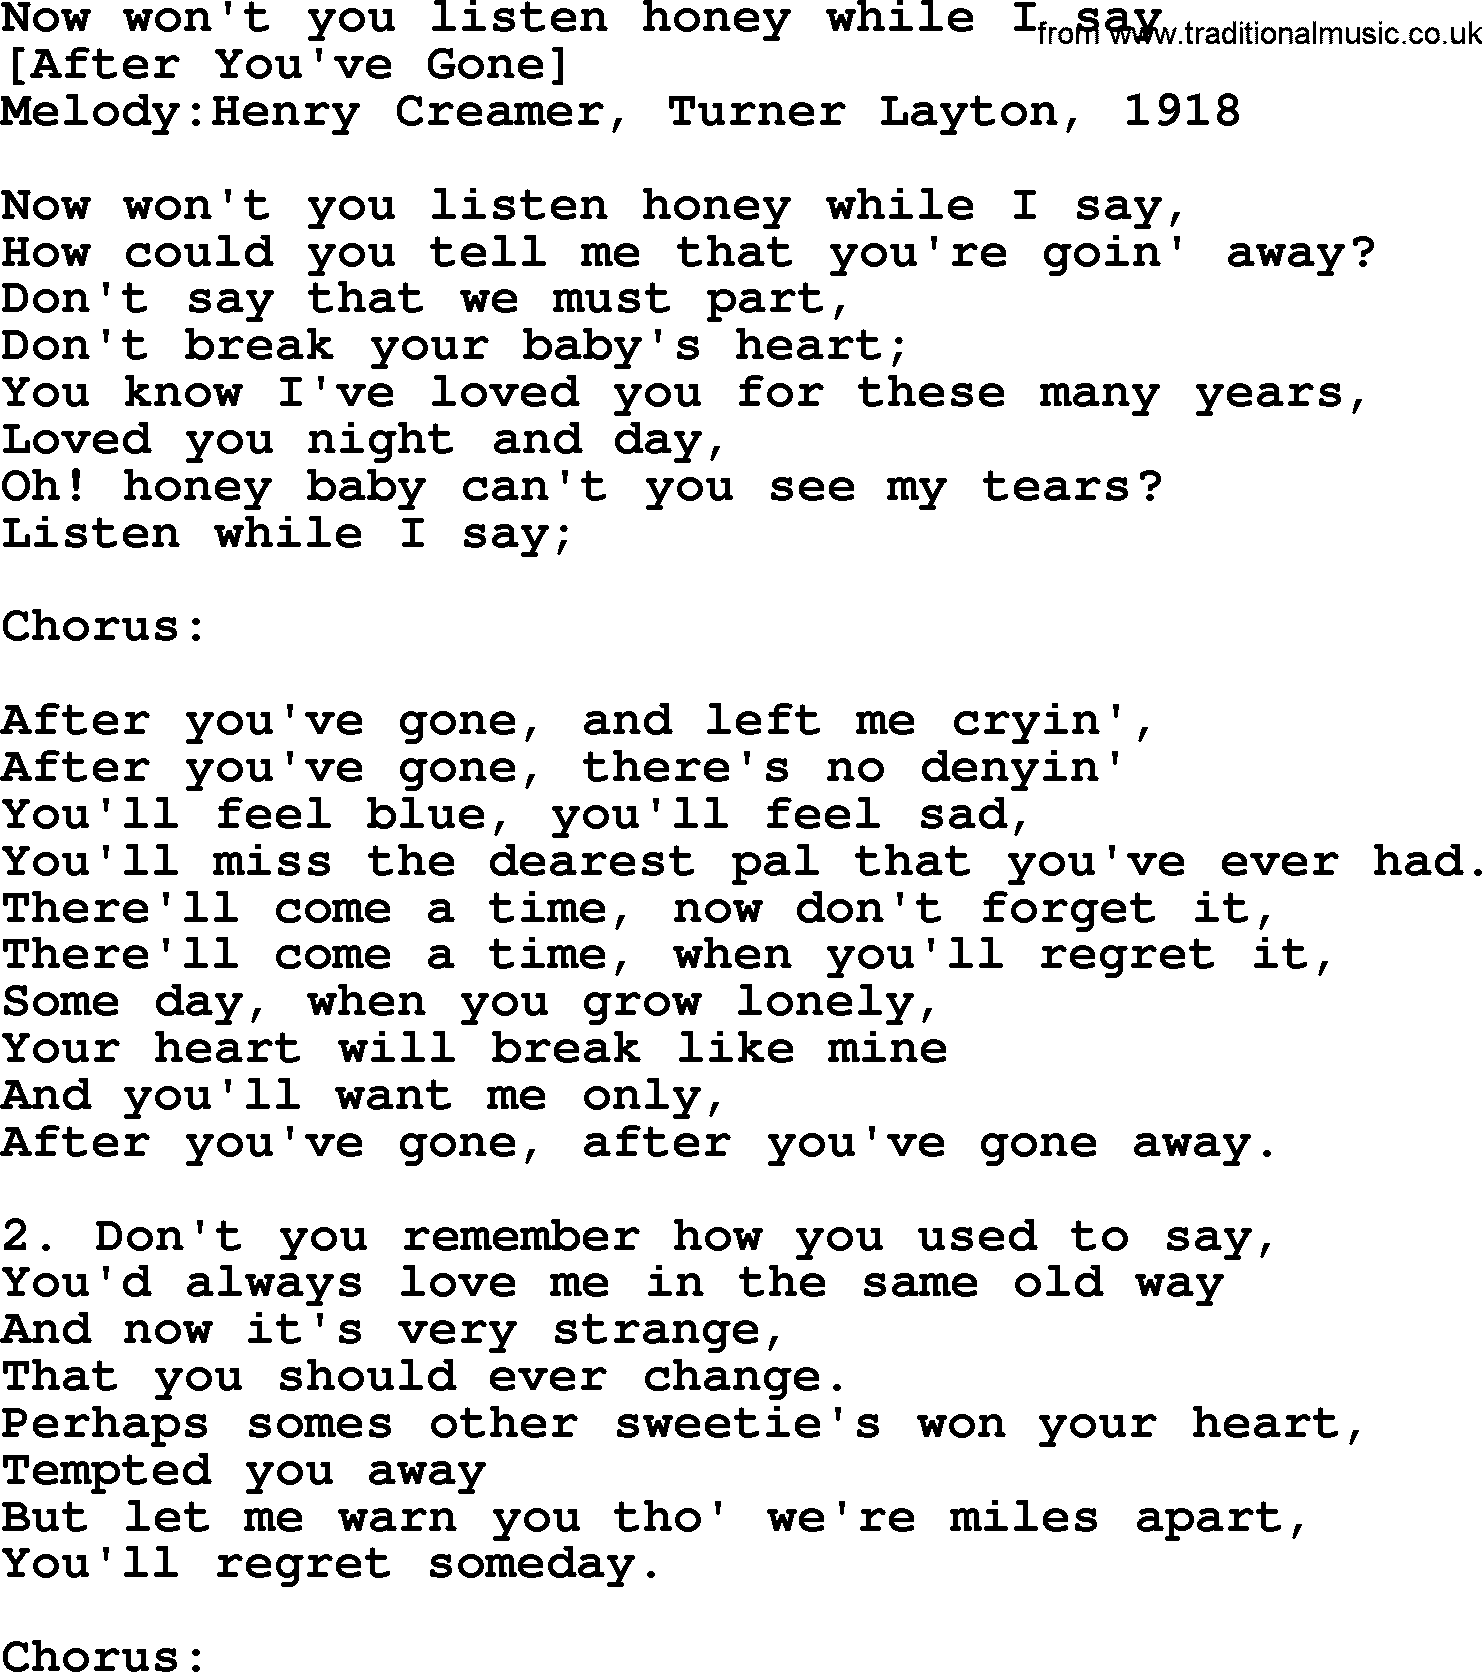 Old American Song: Now Won't You Listen Honey While I Say, lyrics